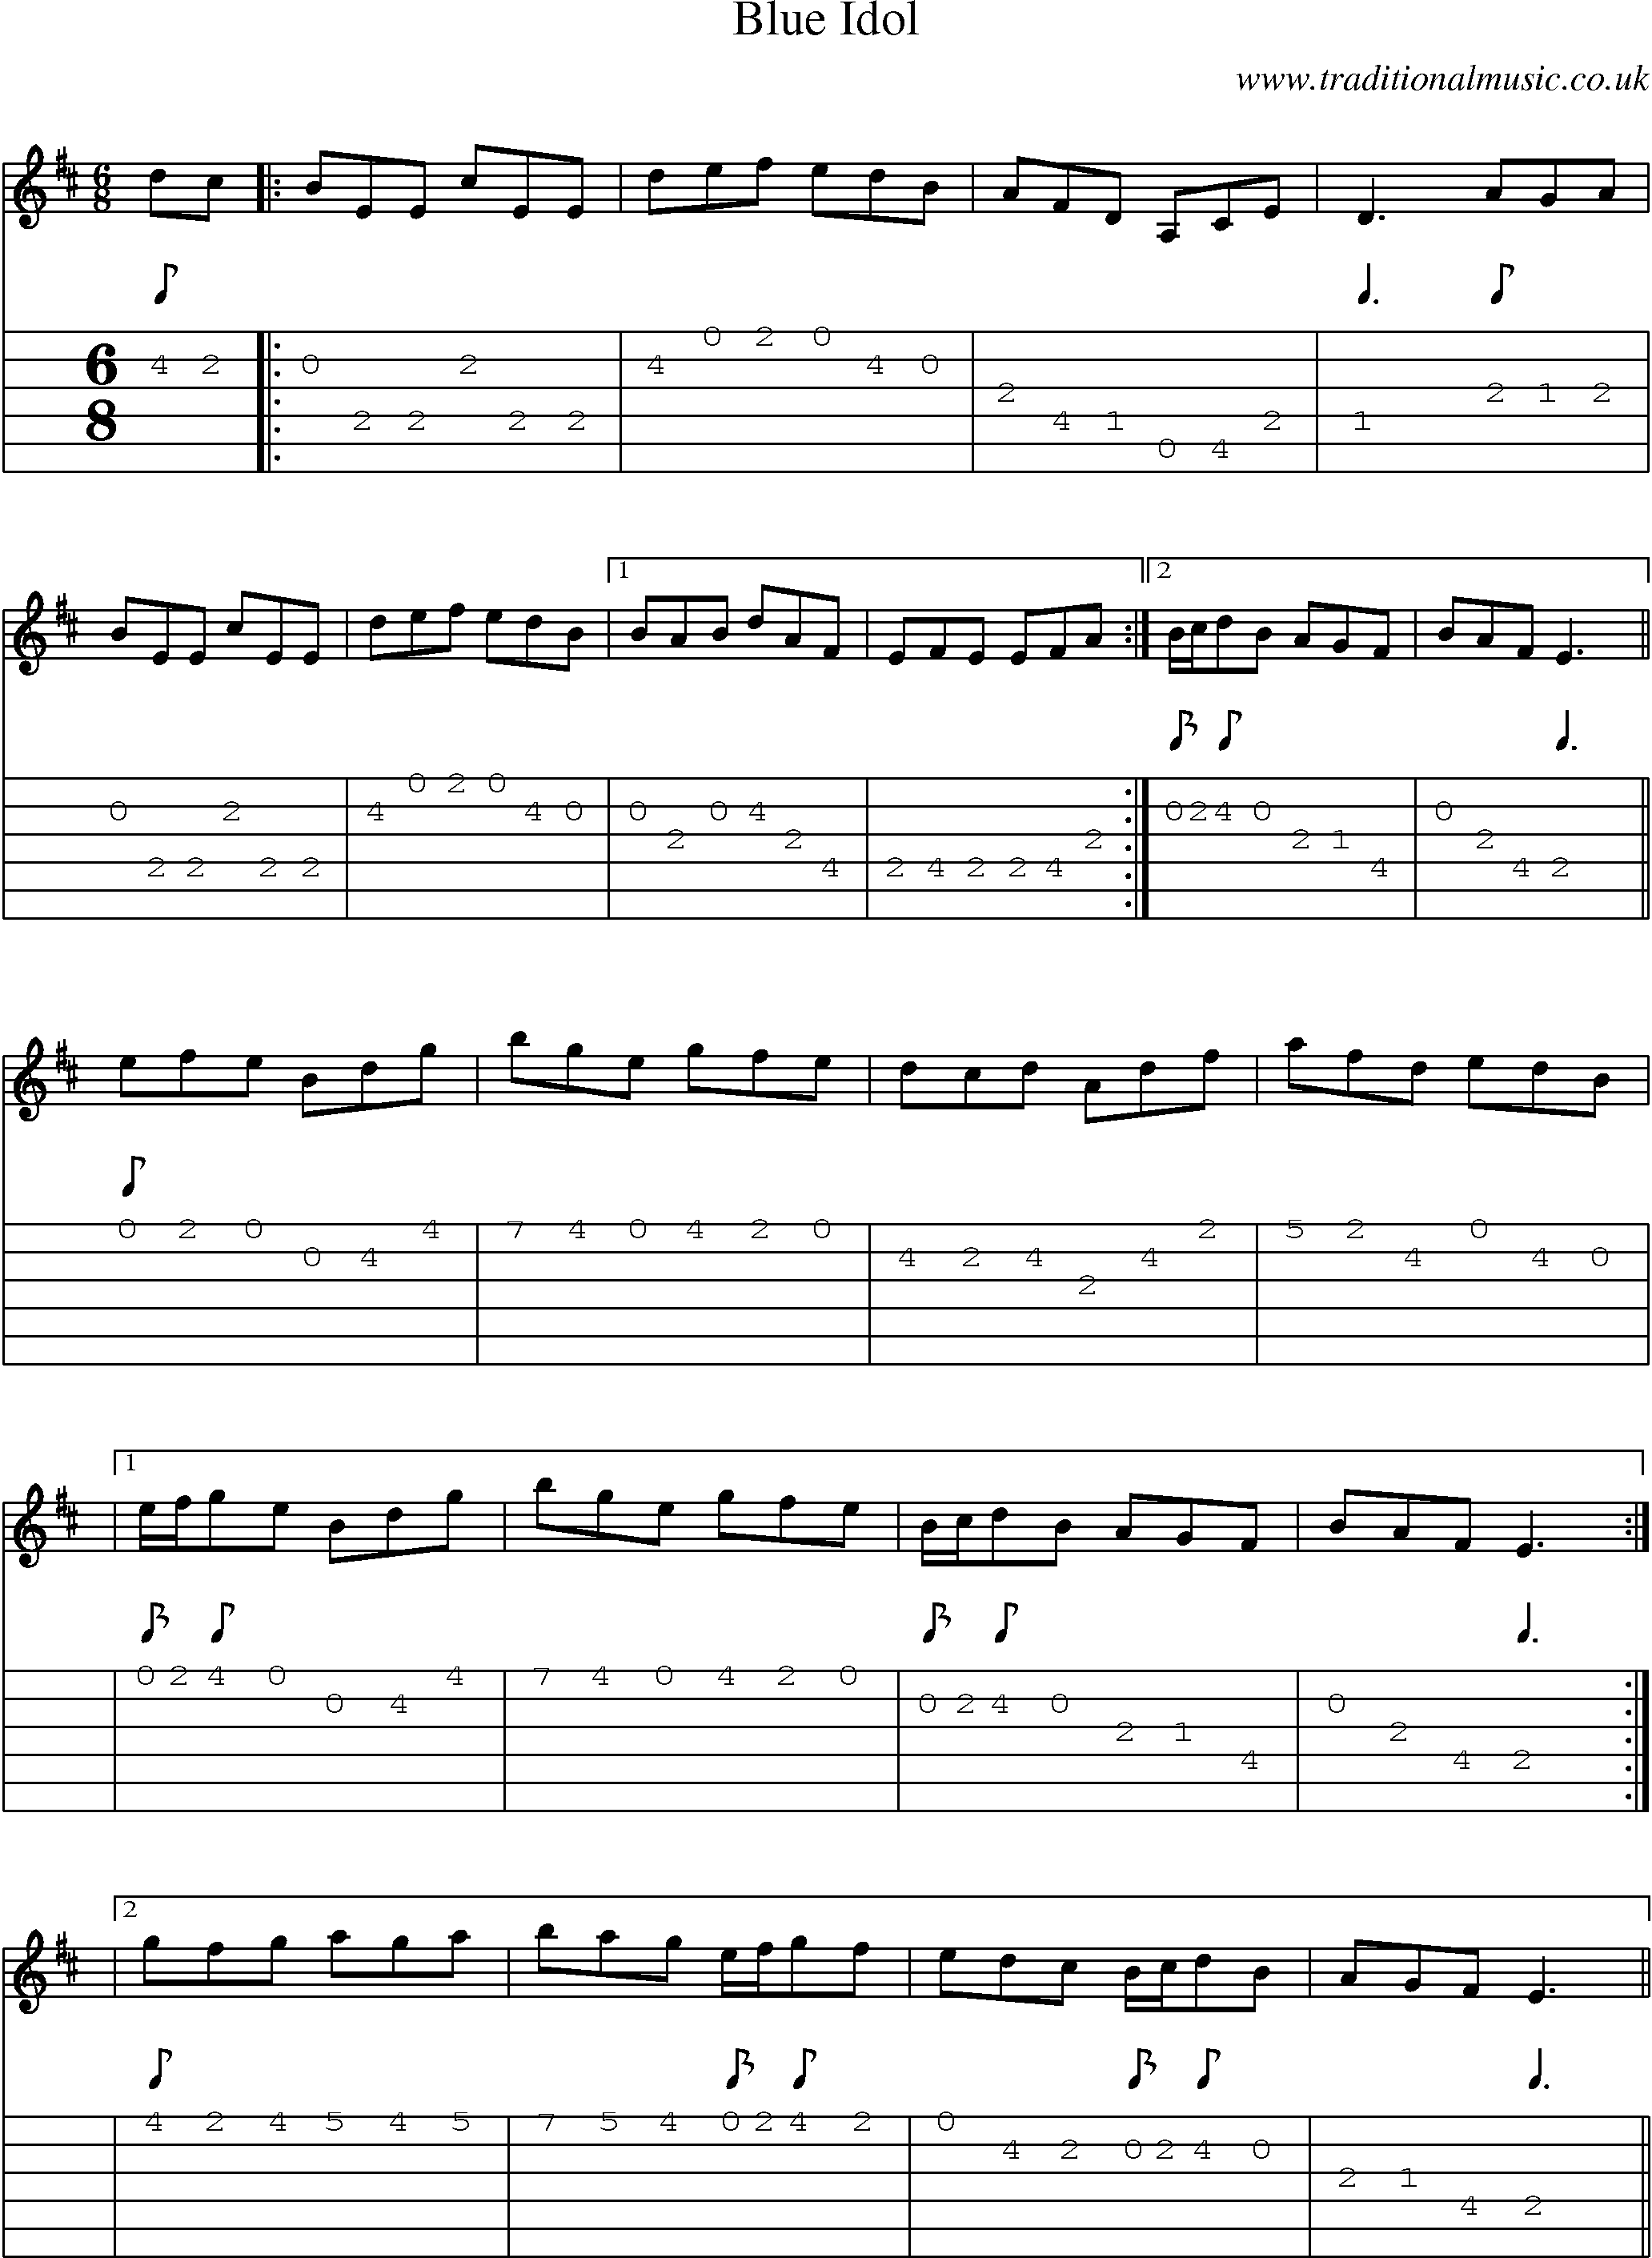 Music Score and Guitar Tabs for Blue Idol